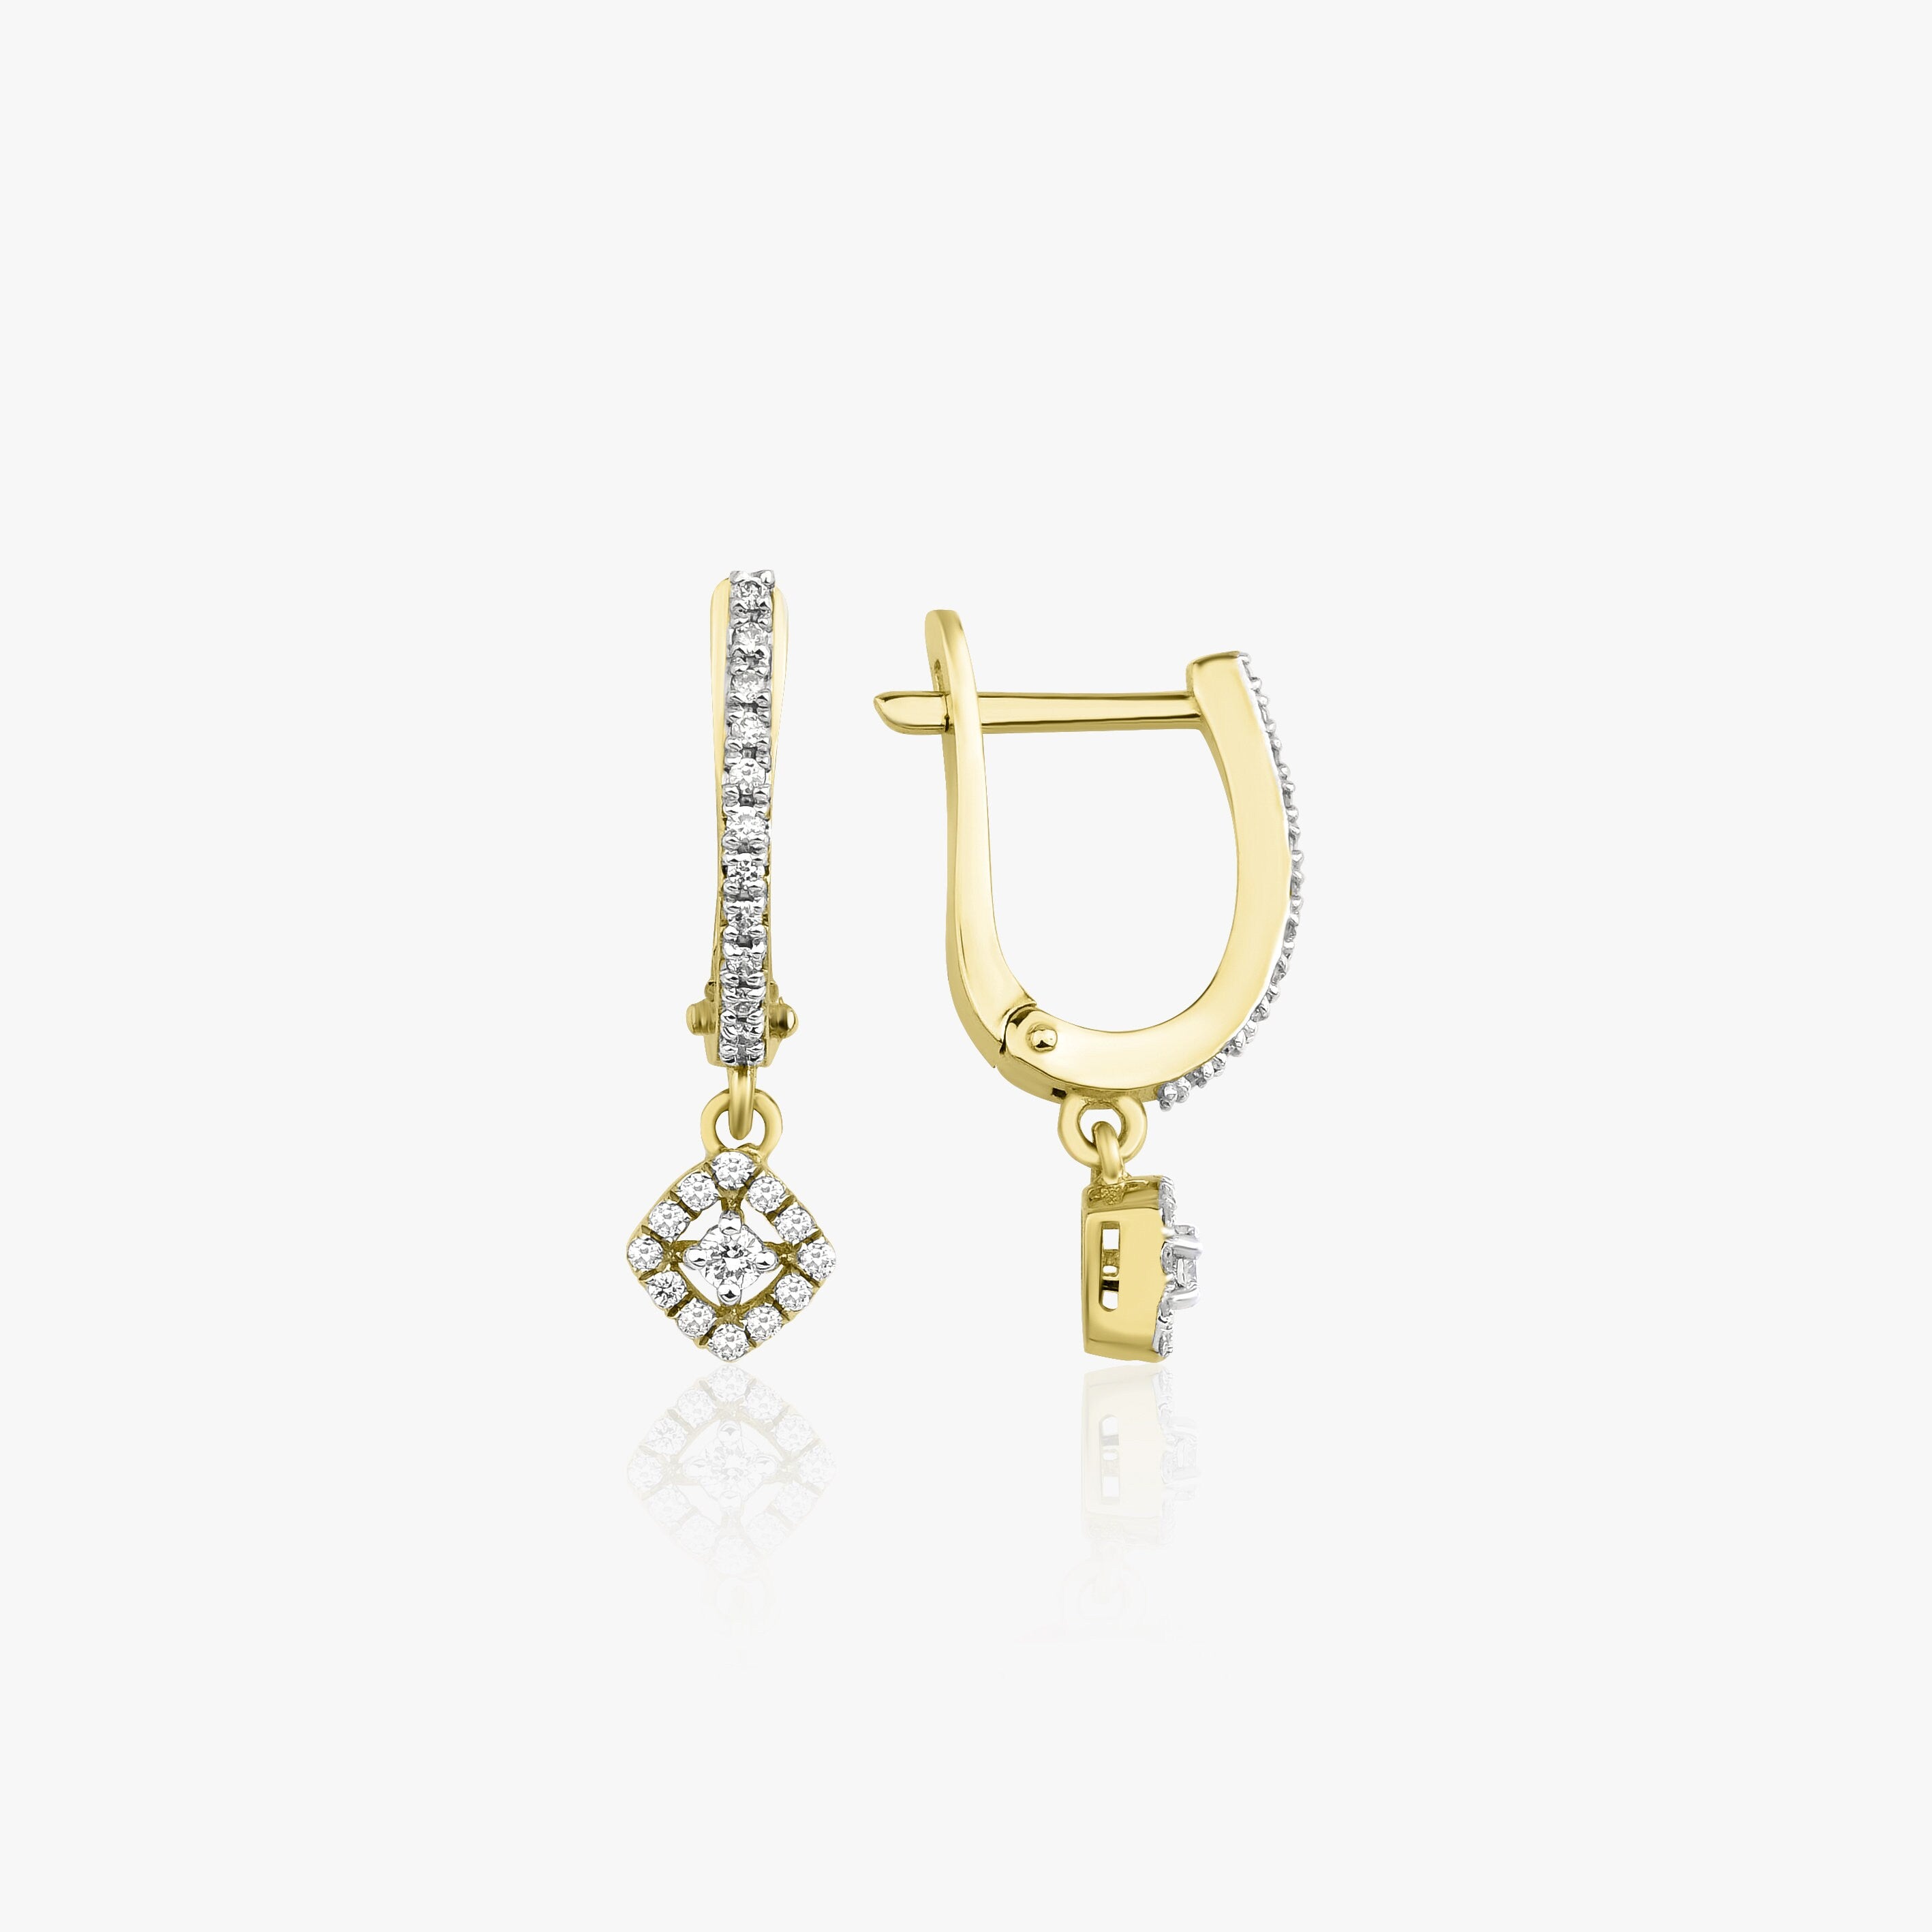 Diamond Dangle Earrings Available in 14K and 18K Gold